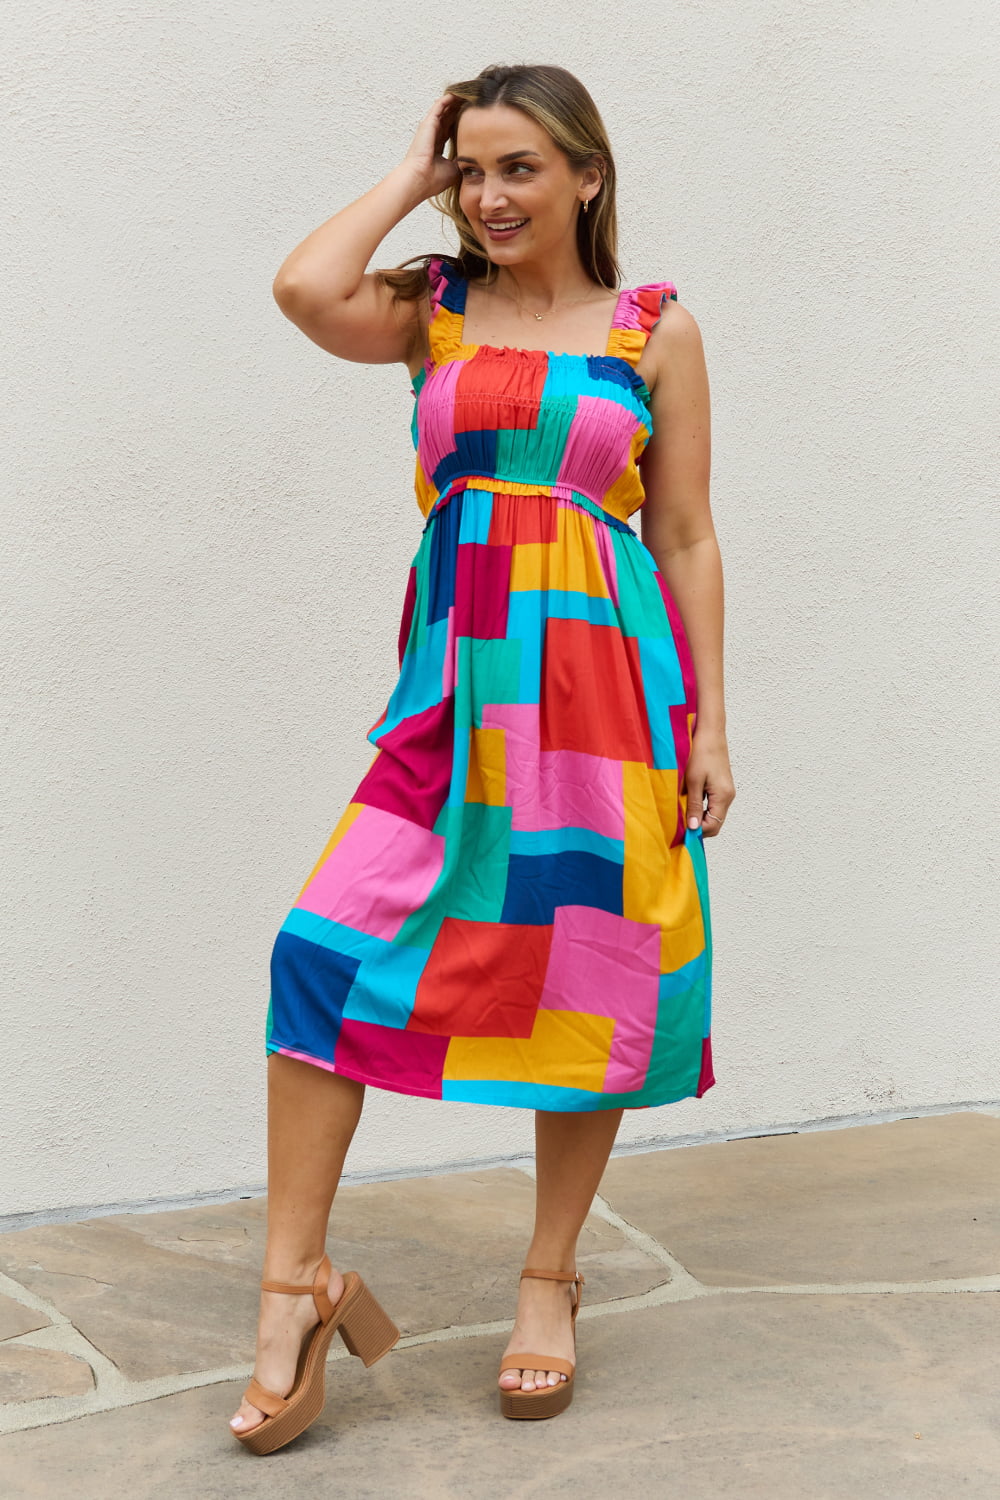 And The Why Multicolored Square Print Summer Dress - Runway Frenzy